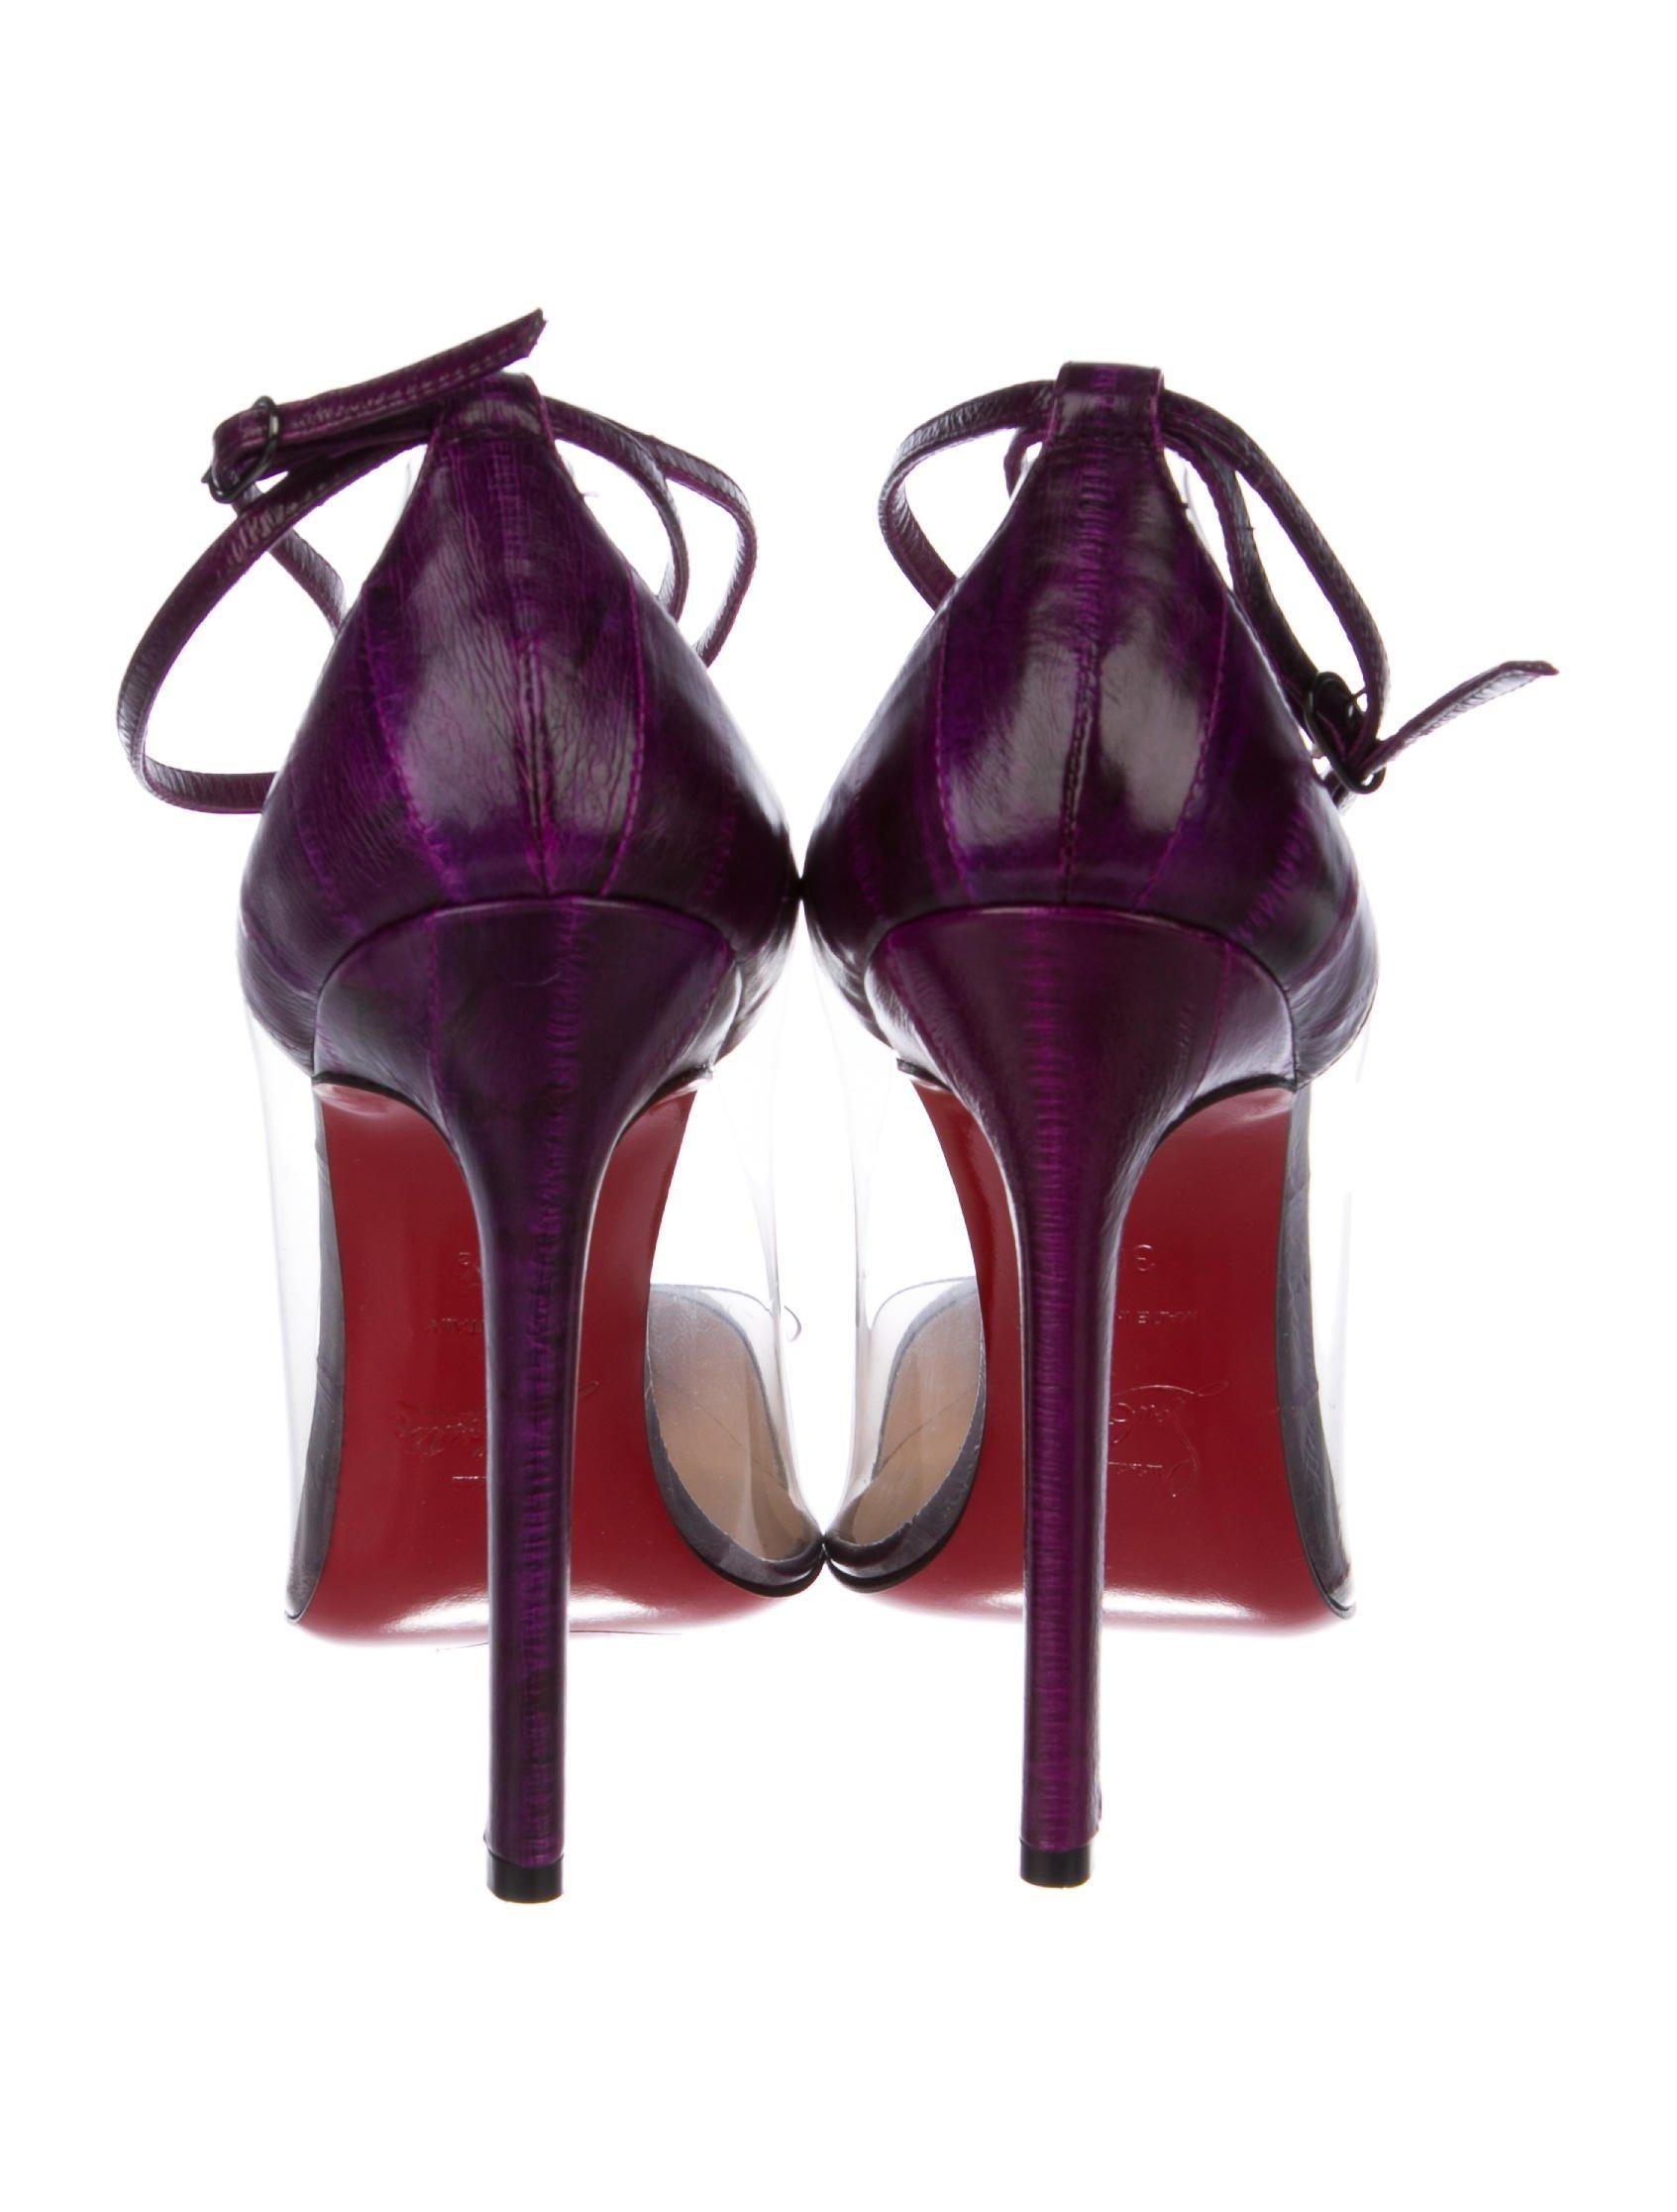 Black Christian Louboutin NEW Clear PVC Purple Leather Evening Pumps Heels in Box